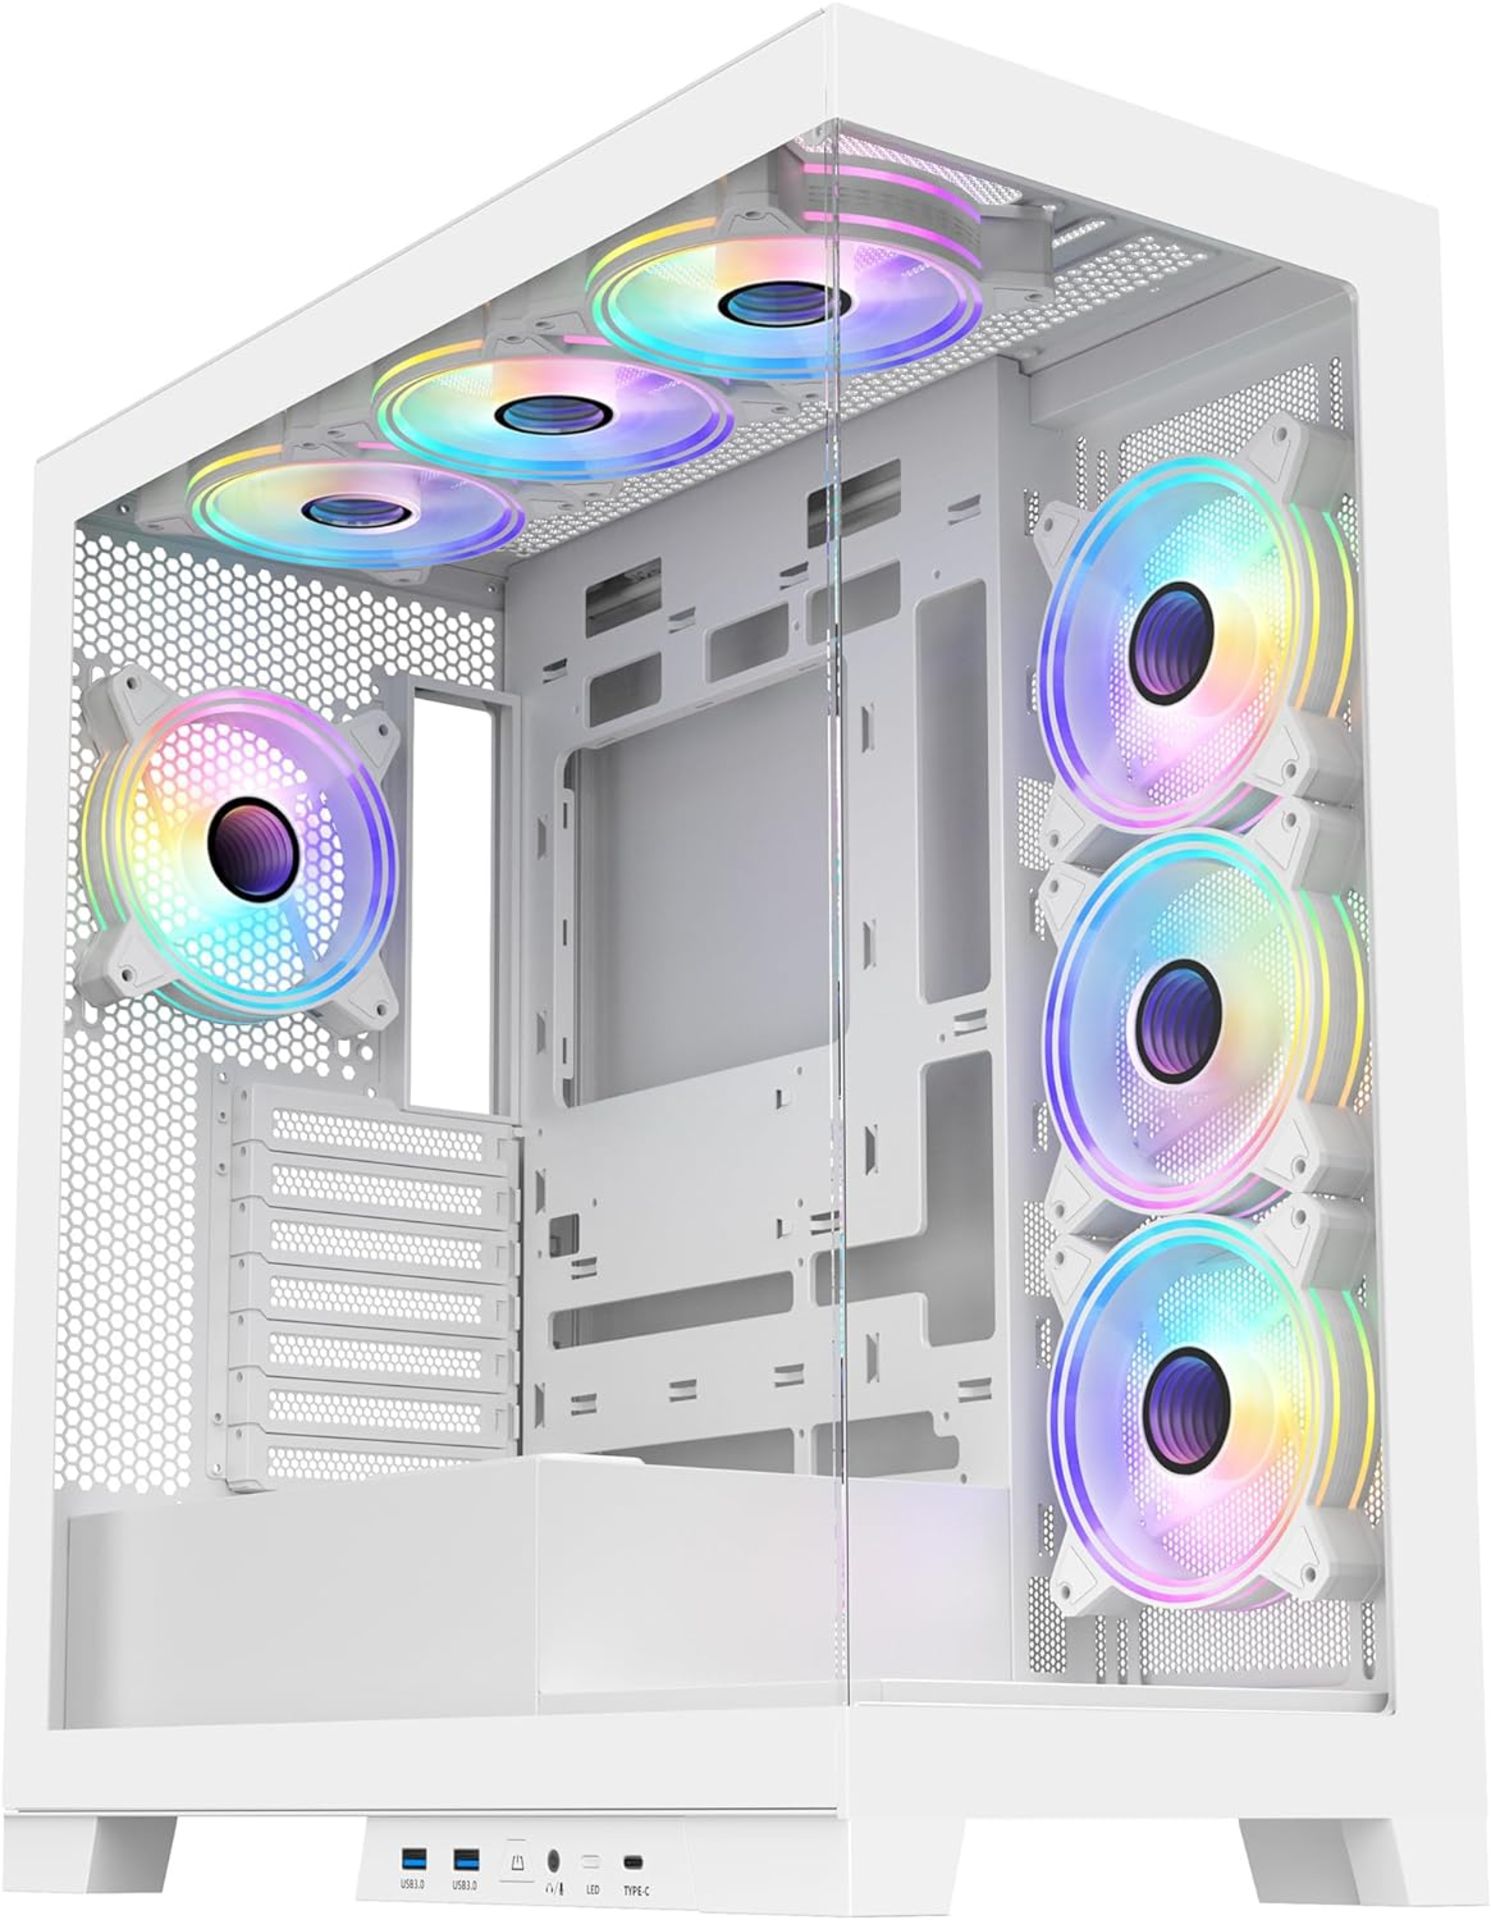 NEW & BOXED CIT Diamond XR Mid Tower PC Case With 7 Fans - WHITE. RRP £99.99. If you want a sharp-